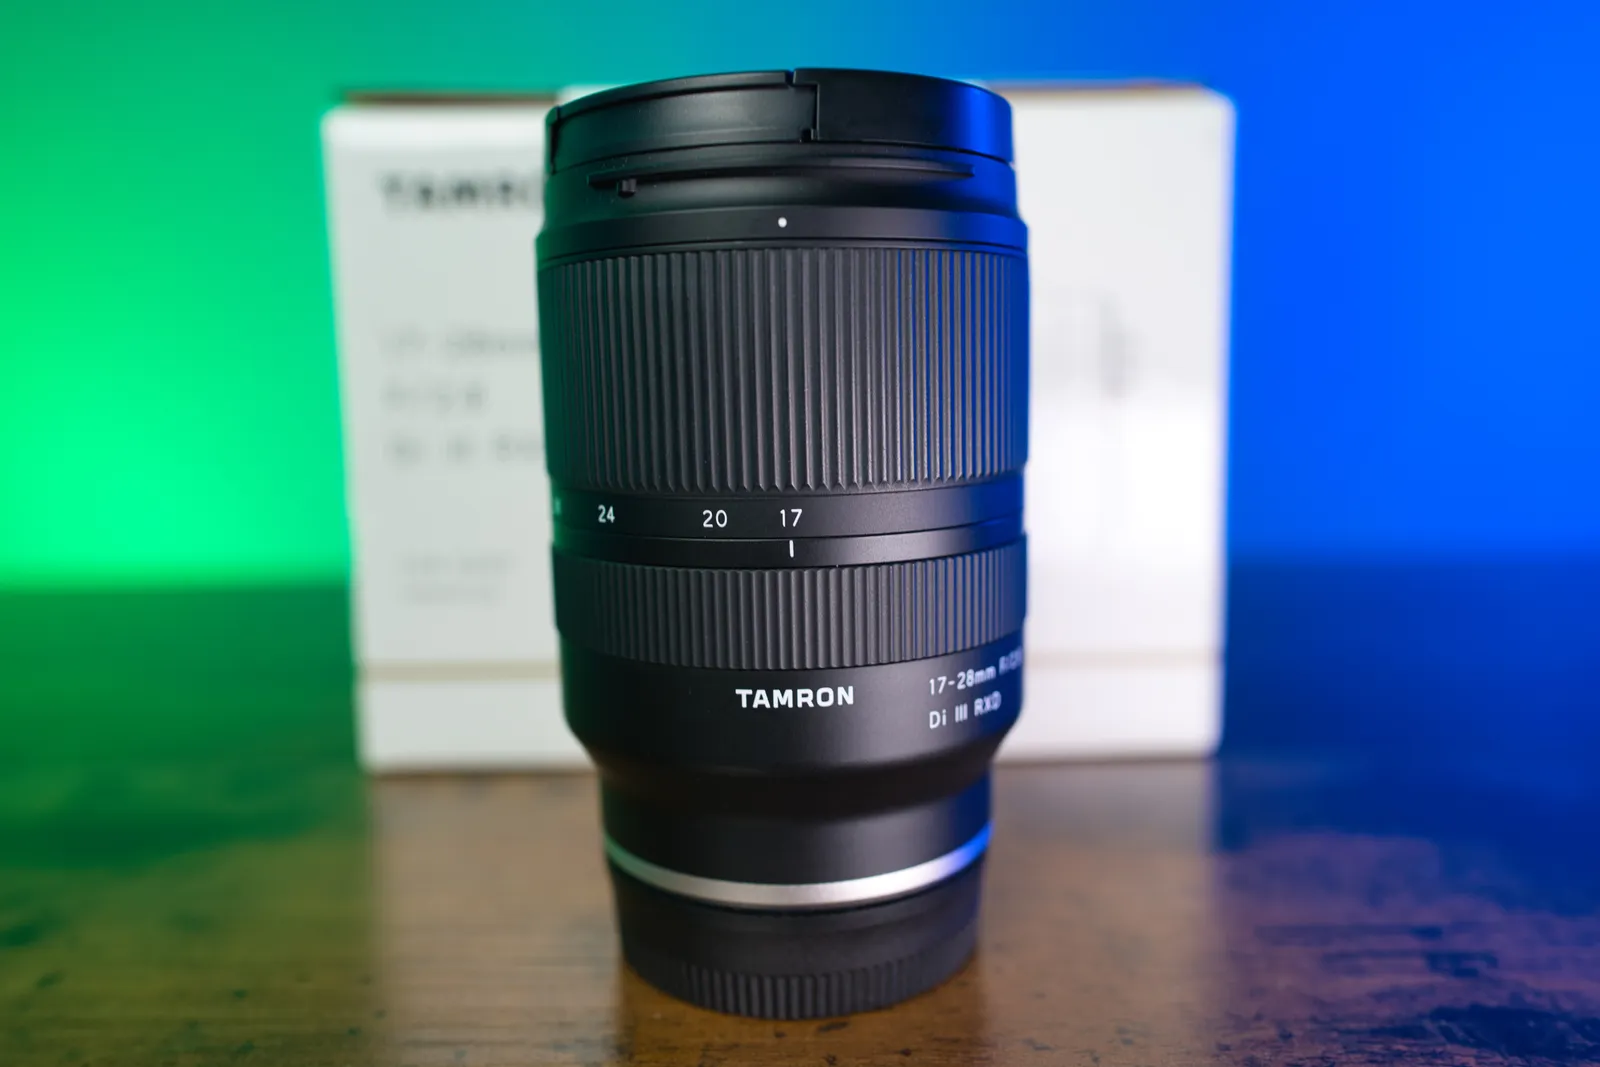 Tamron 17-28mm f/2.8 Di III RXD Lens - Sony FE From Paul Feinberg